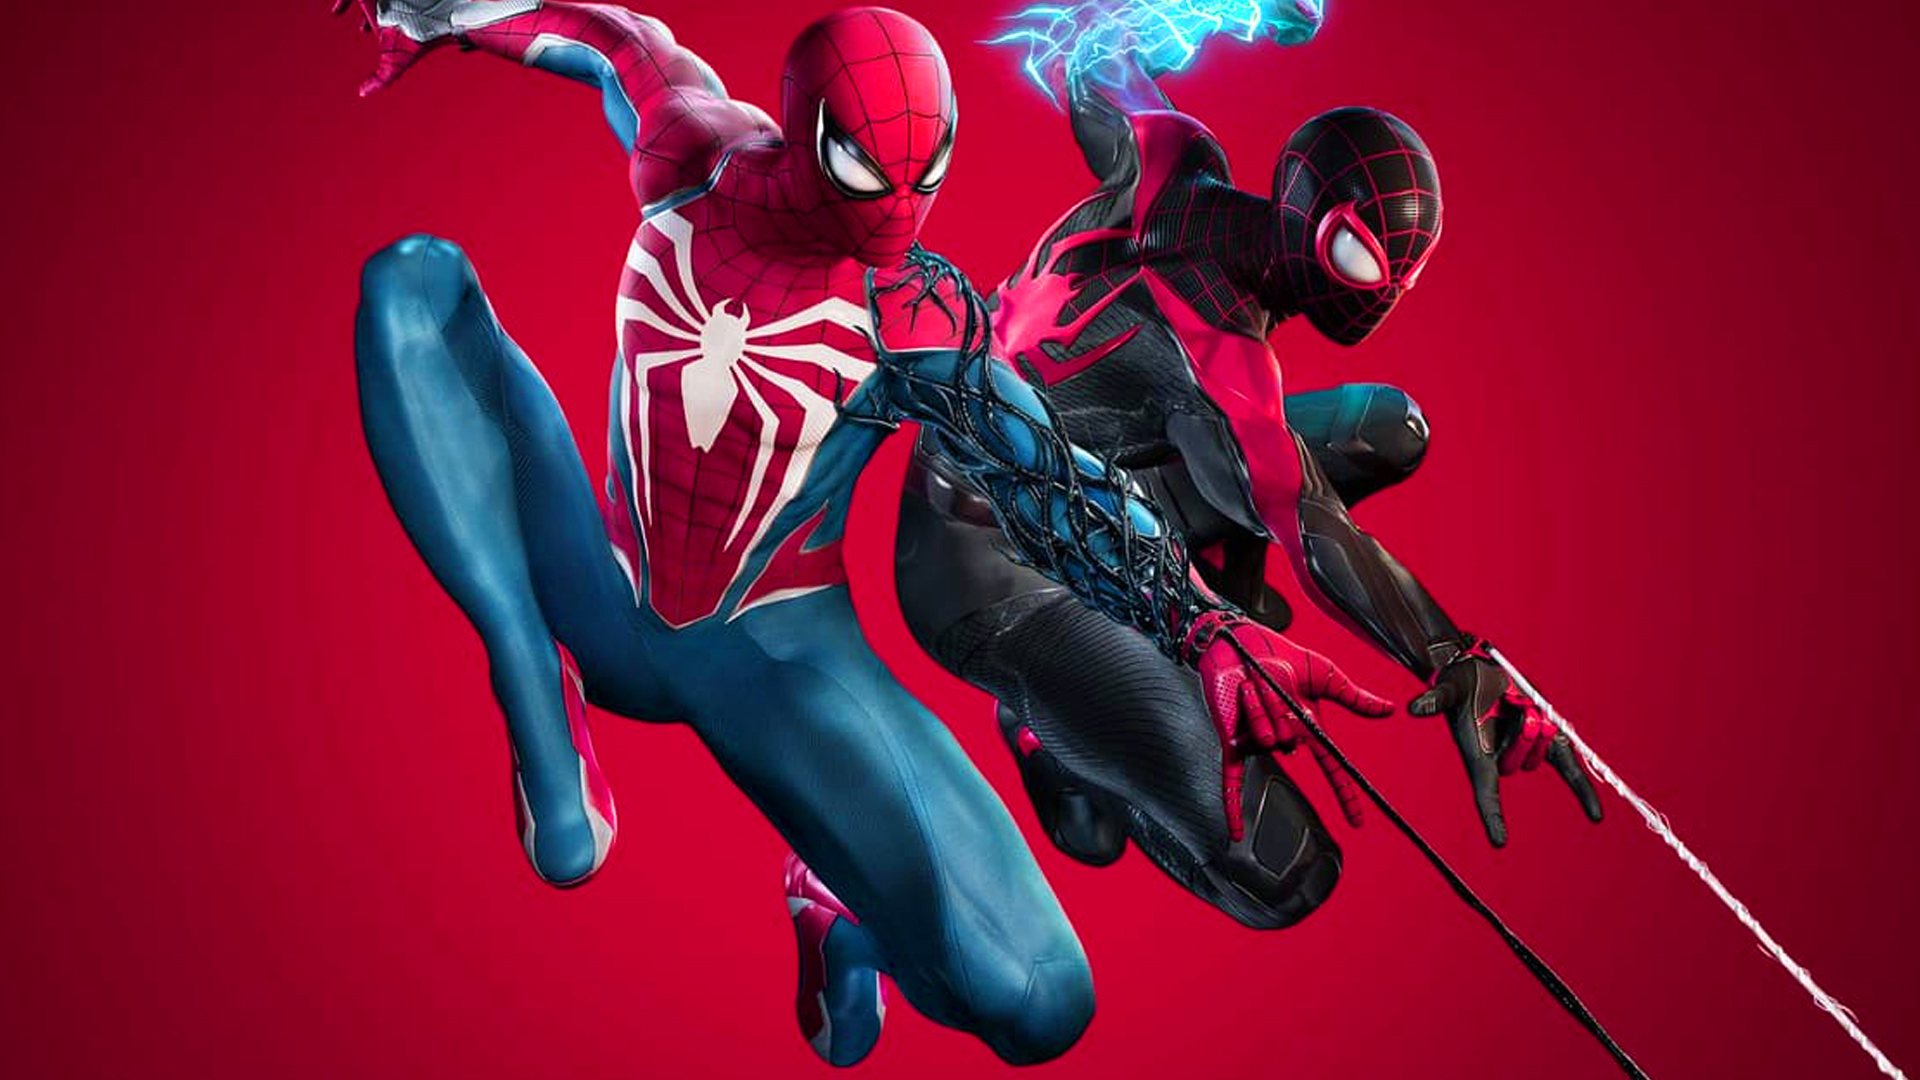 SpiderMan 2 launch date finally confirmed amid Venom debut